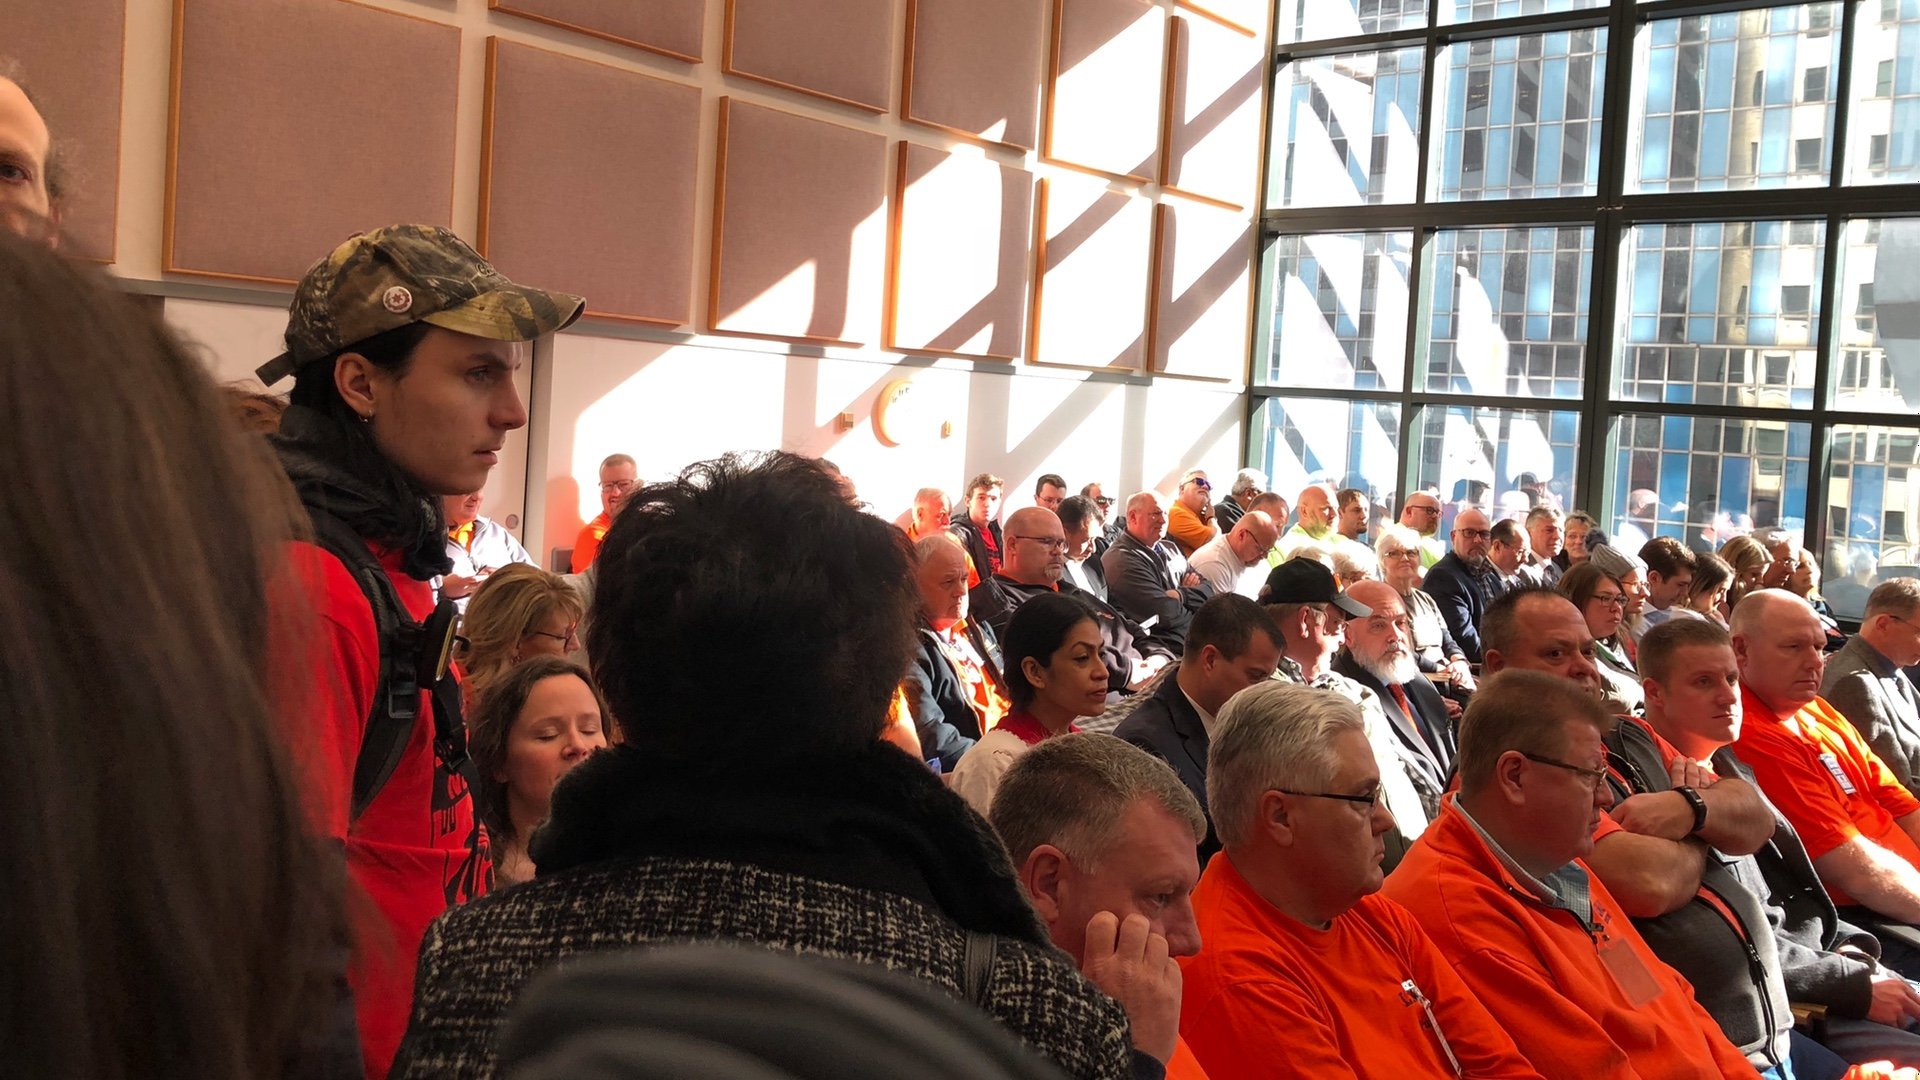 People for and against the pipeline expansion packed the Illinois Commerce Commission hearing. (Patty Wetli / WTTW)